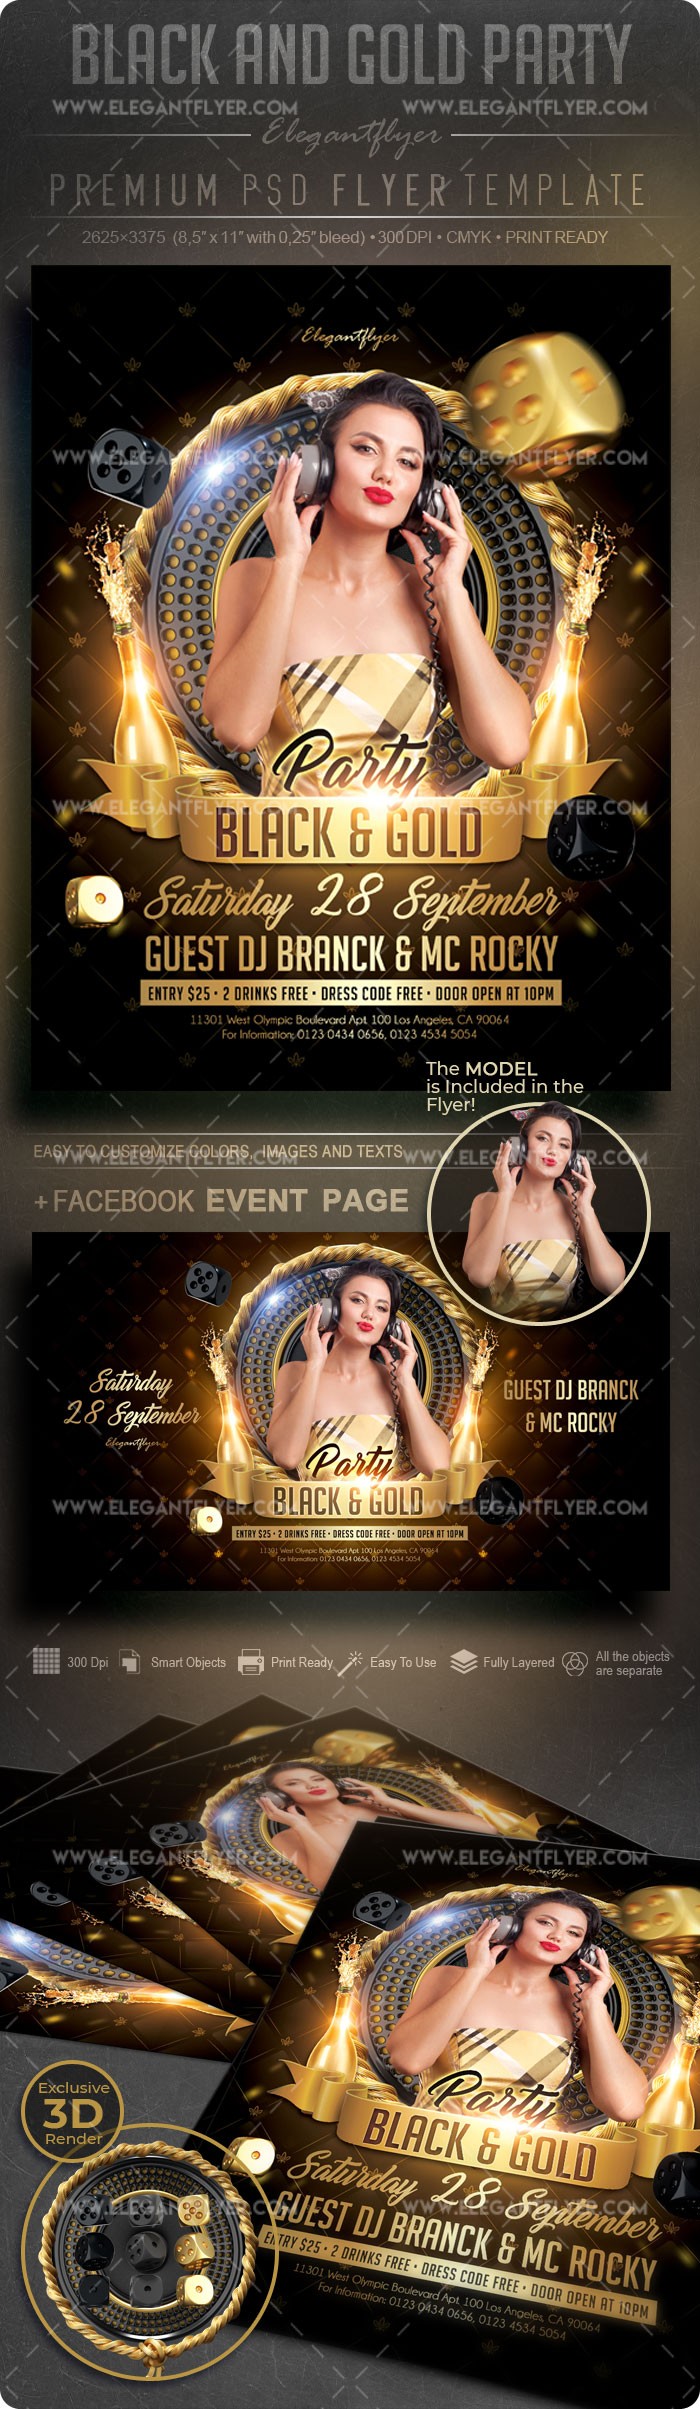 Black and Gold Party by ElegantFlyer